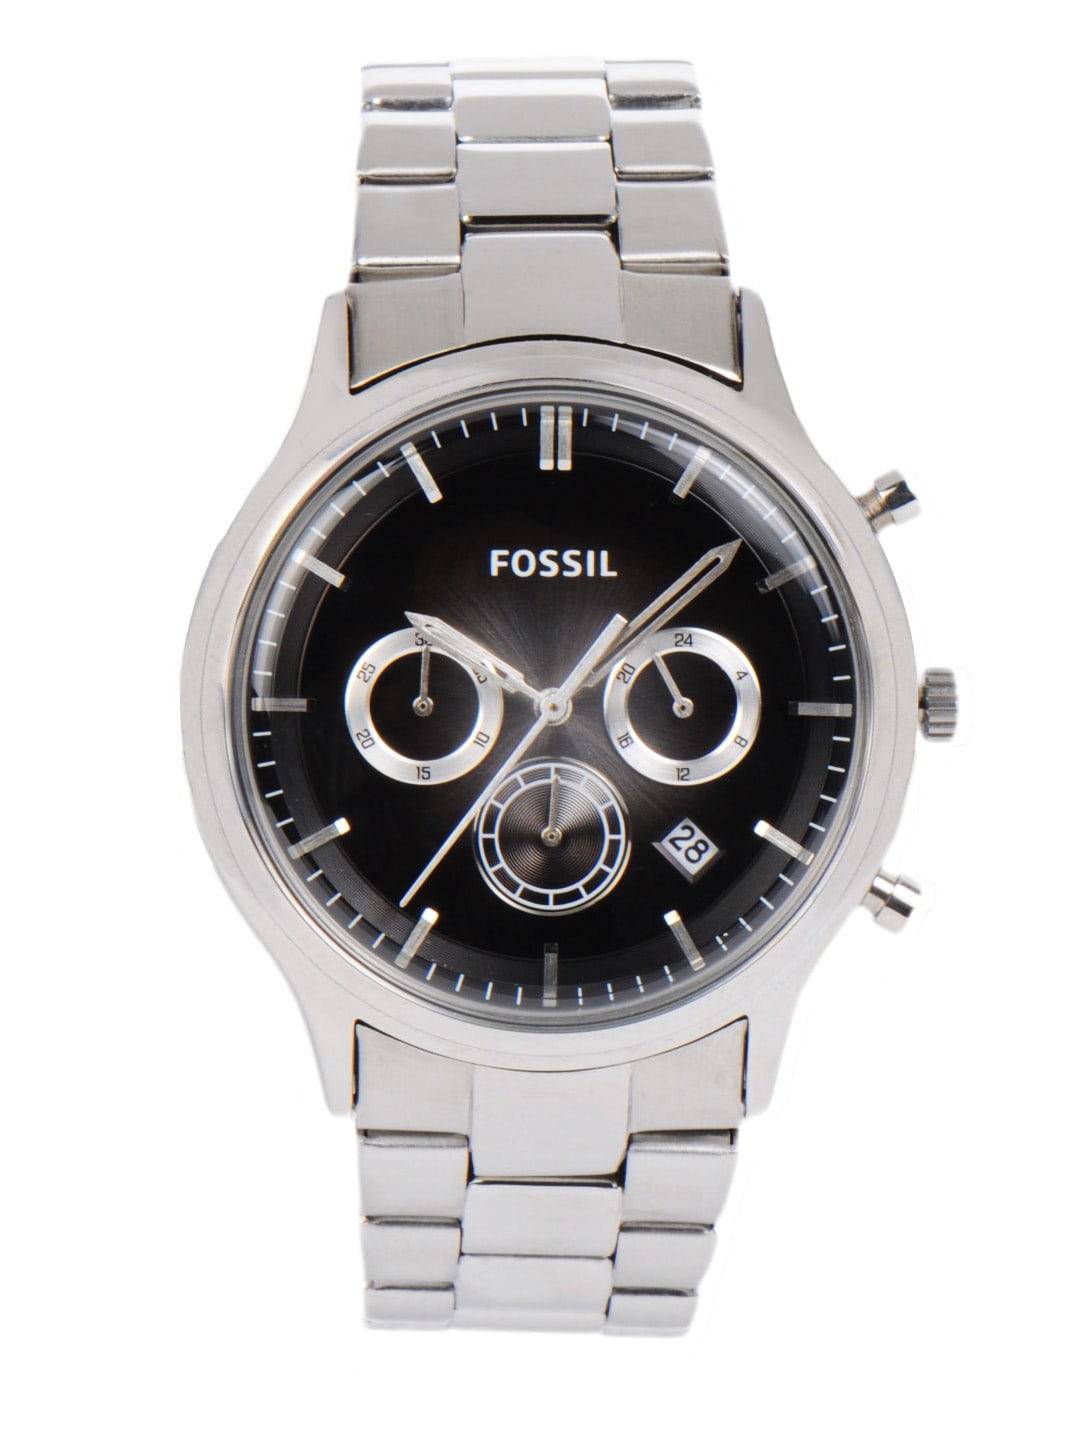 Fossil Men Brown Dial Chronograph Watch FS4673